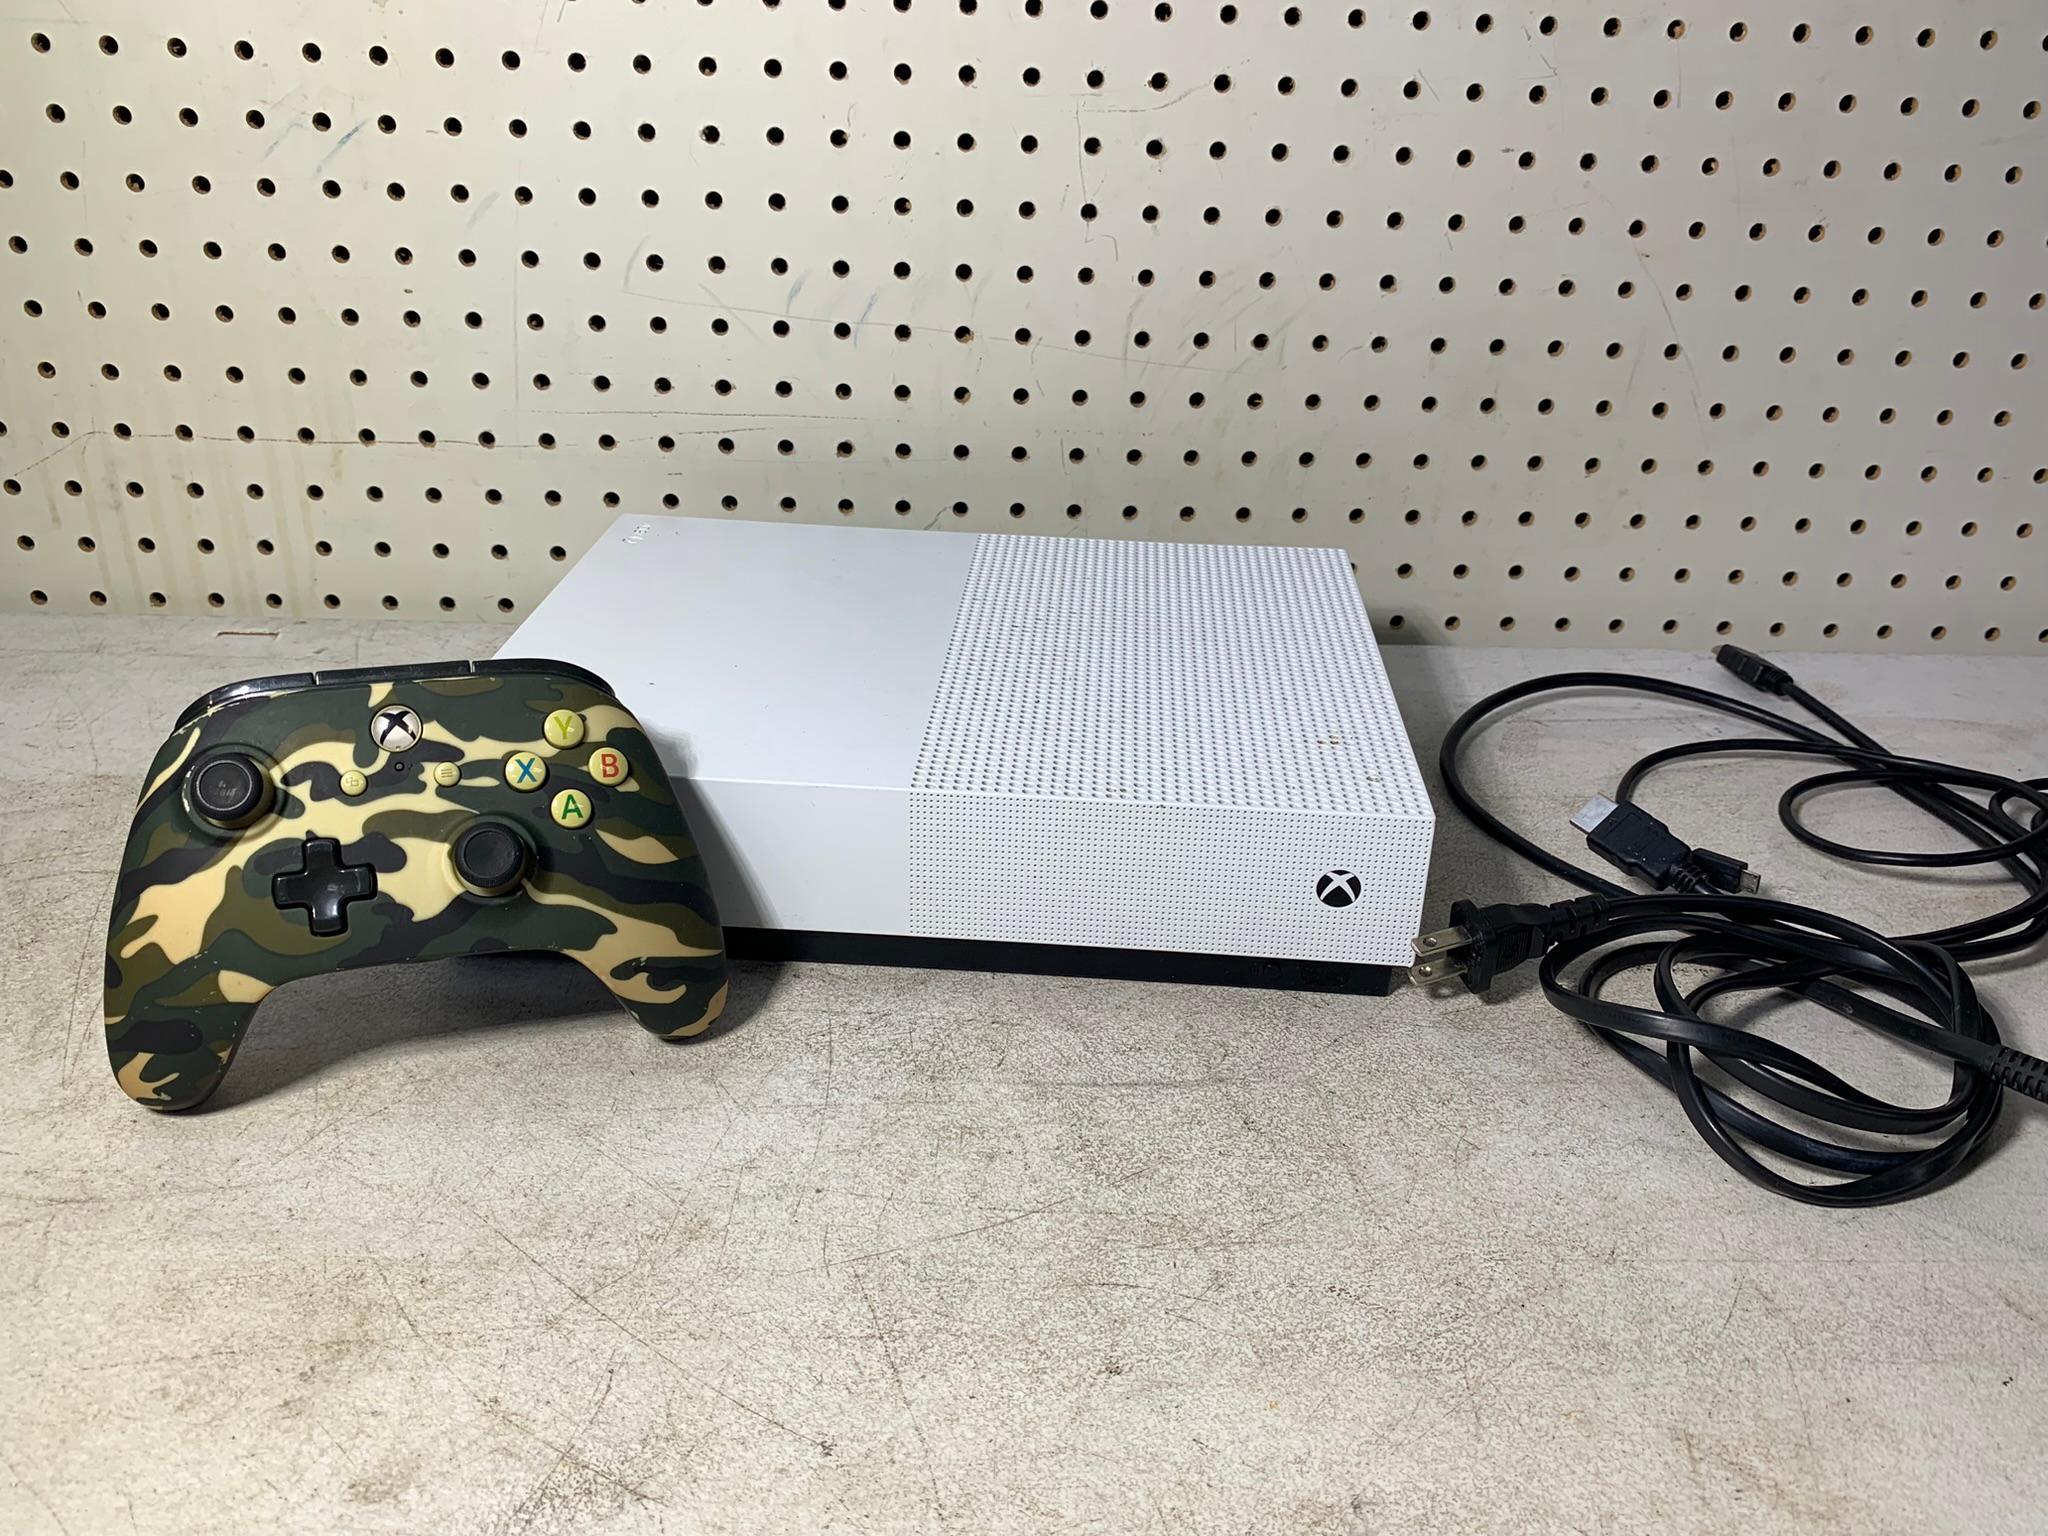 Microsoft XBOX One S All Digital Edition Console with Controller and Cords